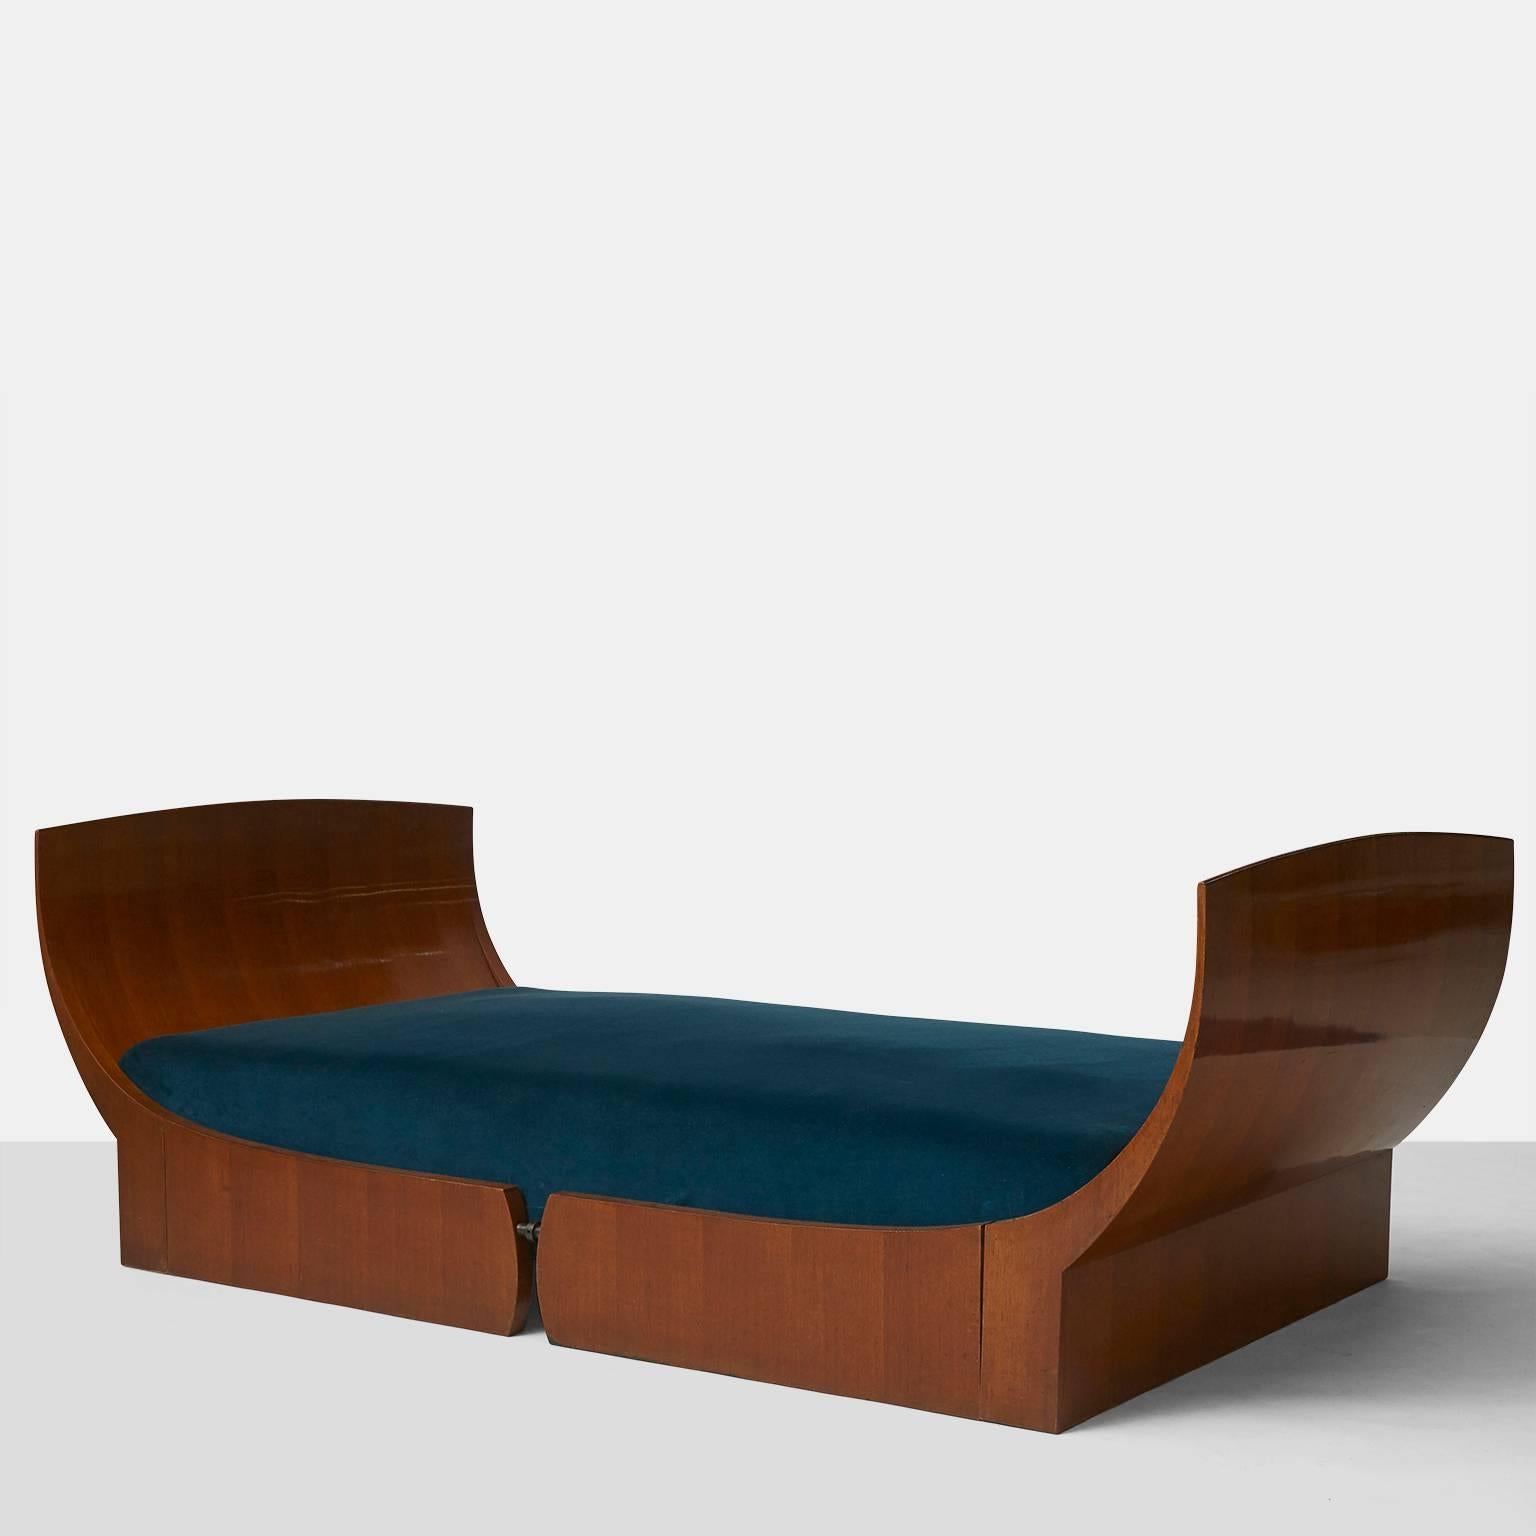 A classic and elegantly shaped walnut daybed by Luigi Caccia Dominioni and one of four only known examples. The bed is upholstered in a deep teal velvet and the graceful flared walnut panels on each end are attached at the base of the frame with an